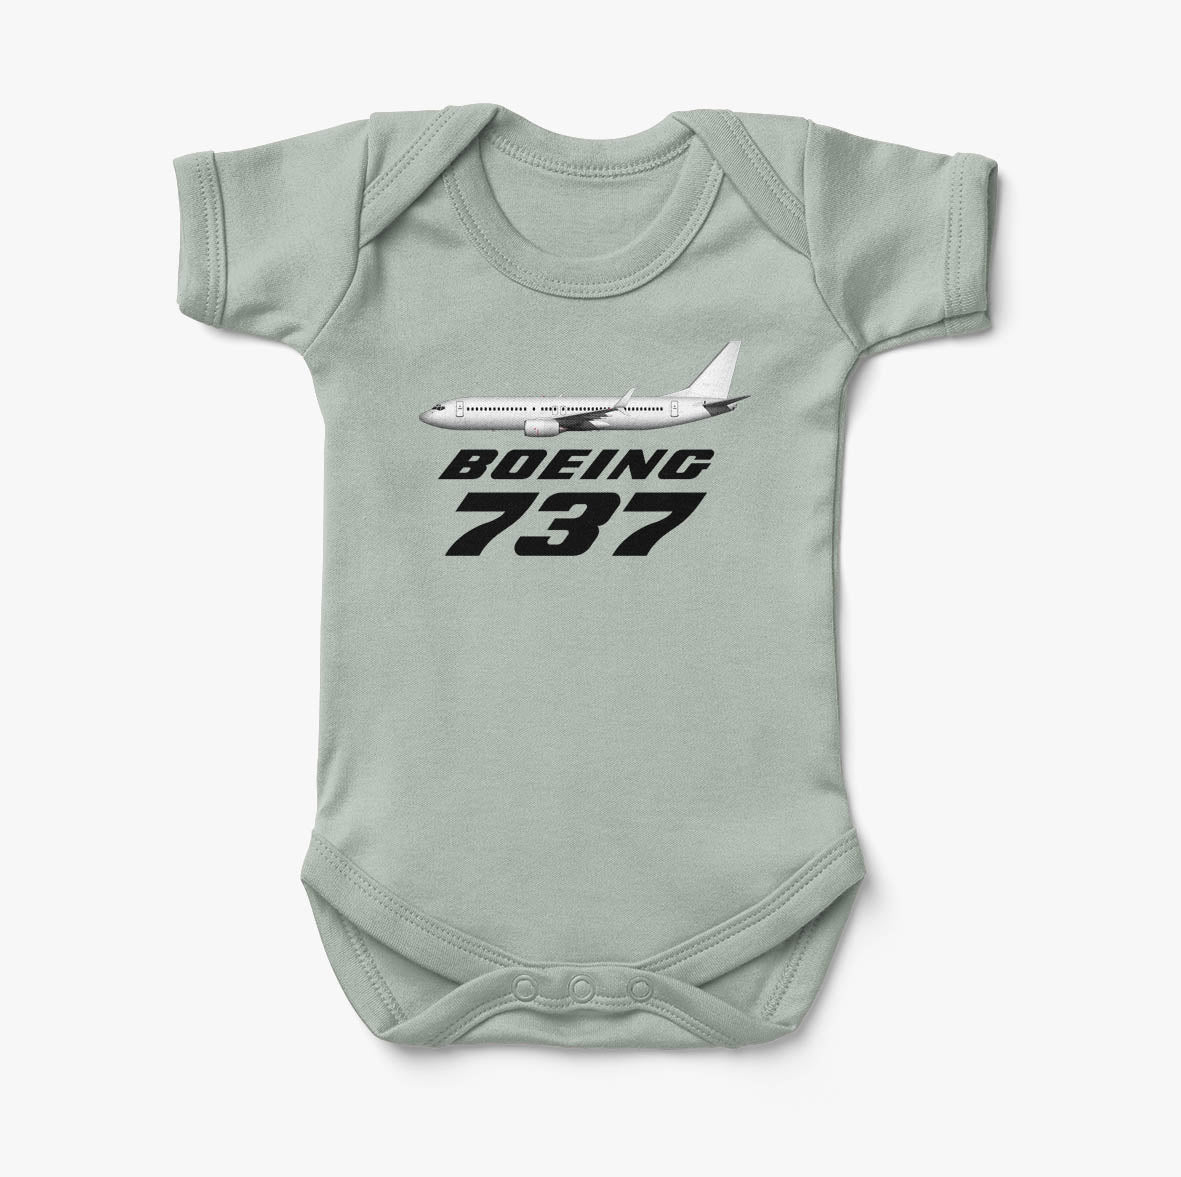 The Boeing 737 Designed Baby Bodysuits